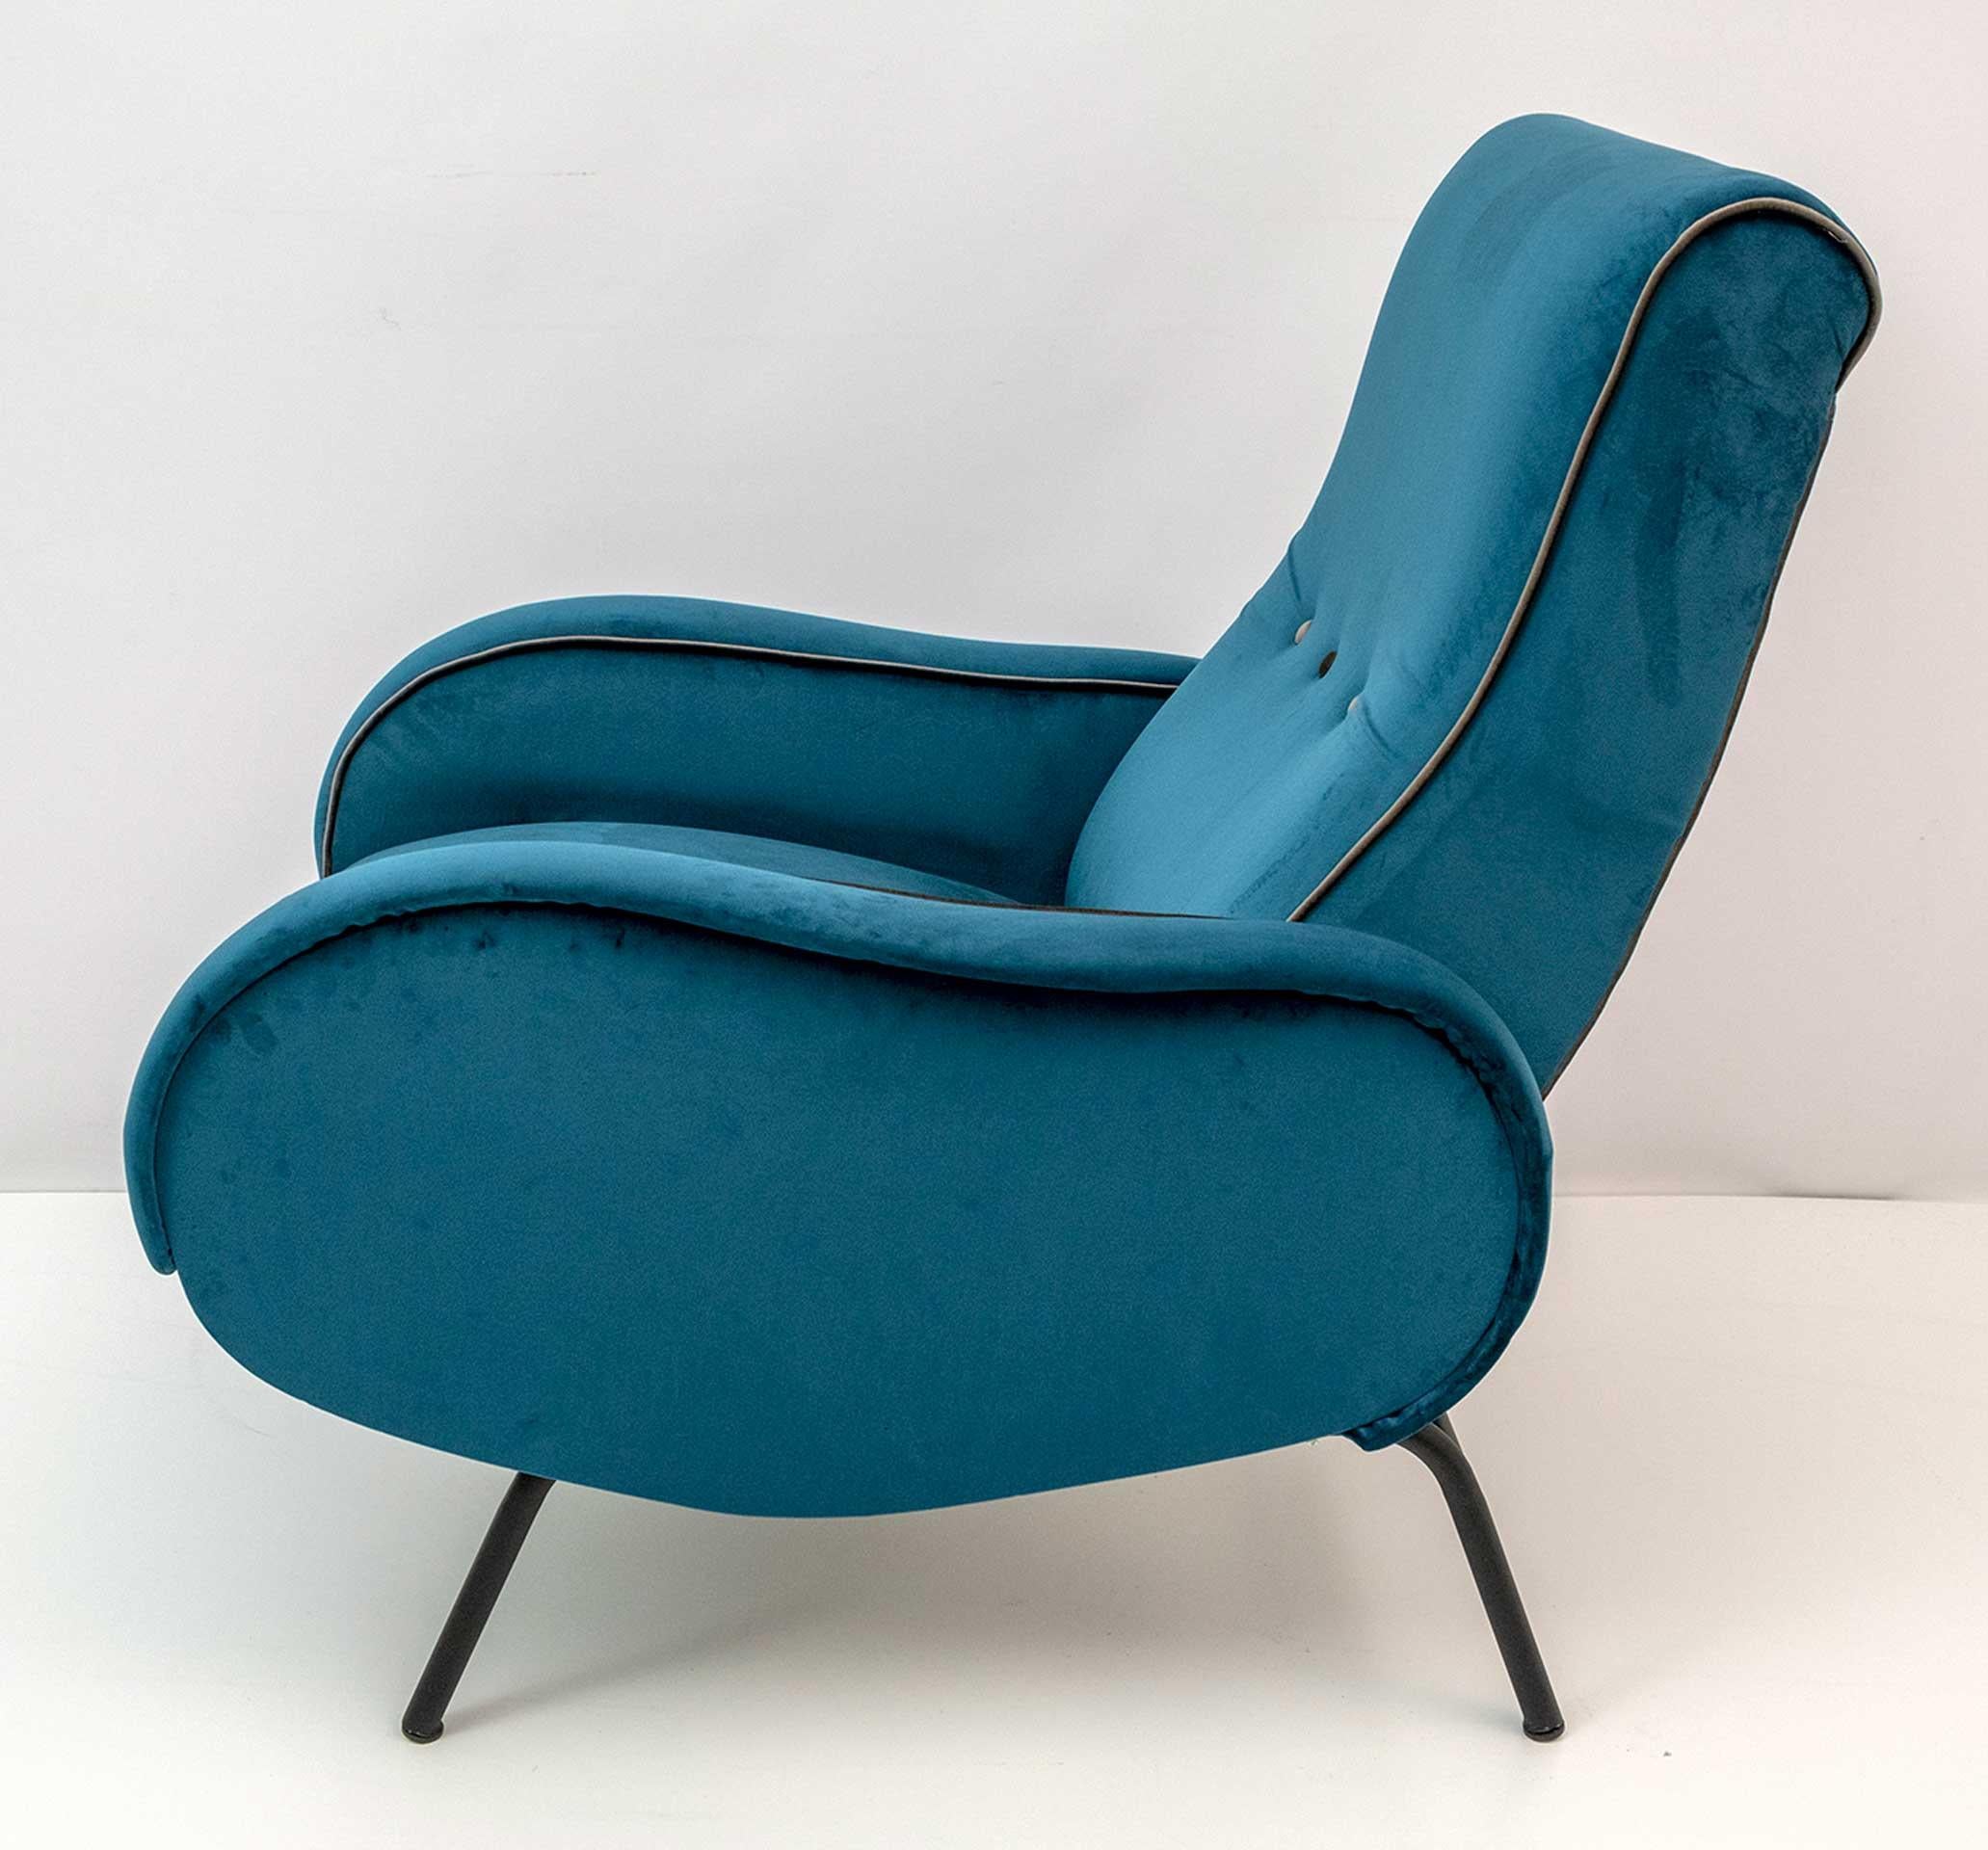 Reclining armchair designed by Marco Zanuso in the 1950s, the armchair has been restored and upholstered in navy blue velvet with a gray piping finish.

The extended armchair measures 148 cm.